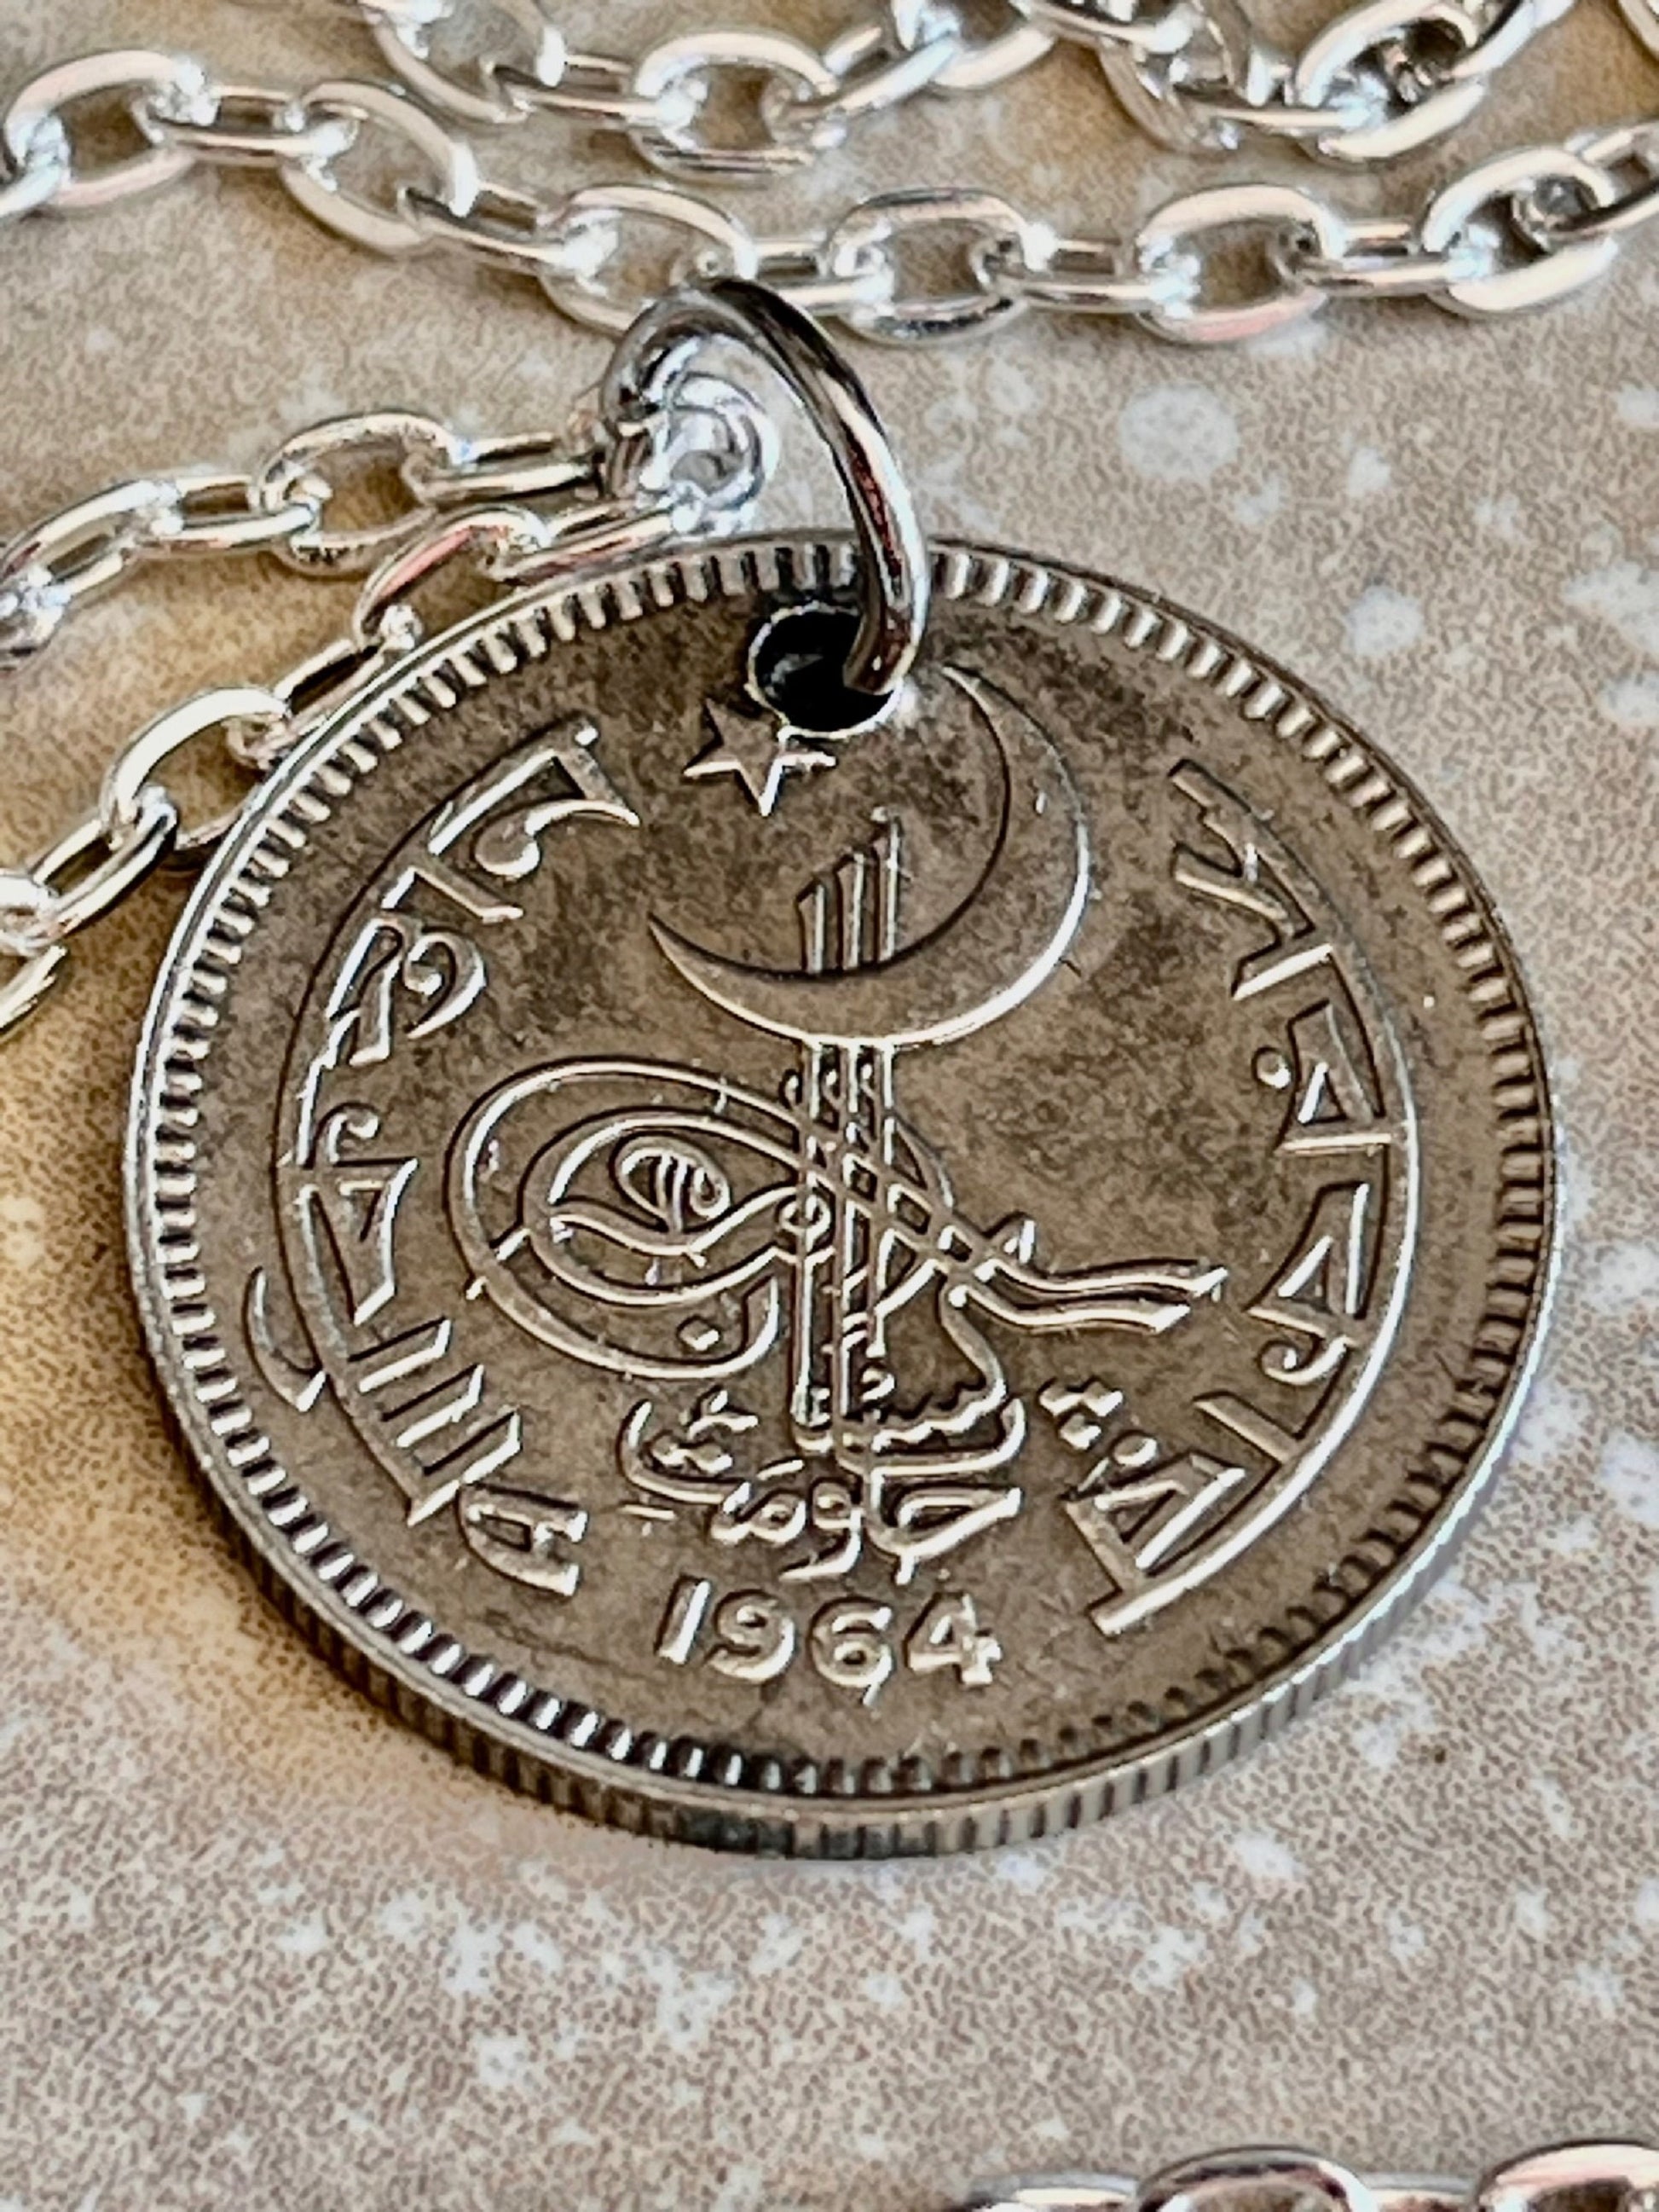 Pakistan Coin Pendant Pakistani 50 PAISA Personal Necklace Old Vintage Handmade Jewelry Gift Friend Charm For Him Her World Coin Collector